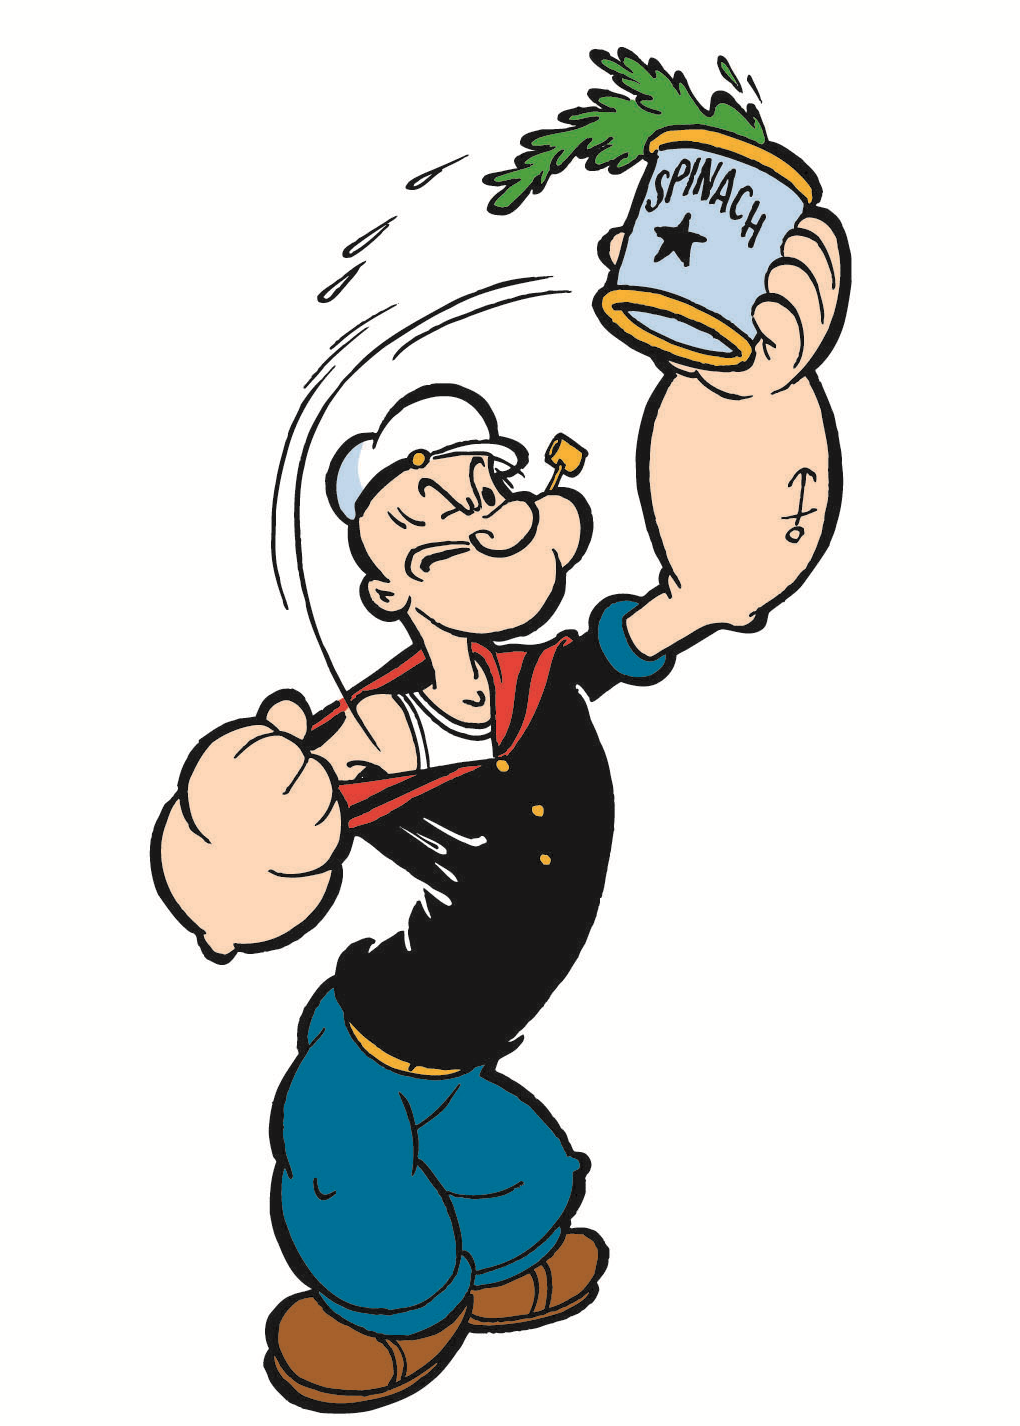 Muscle Man . Popeye The Sailor Man Do you remember?